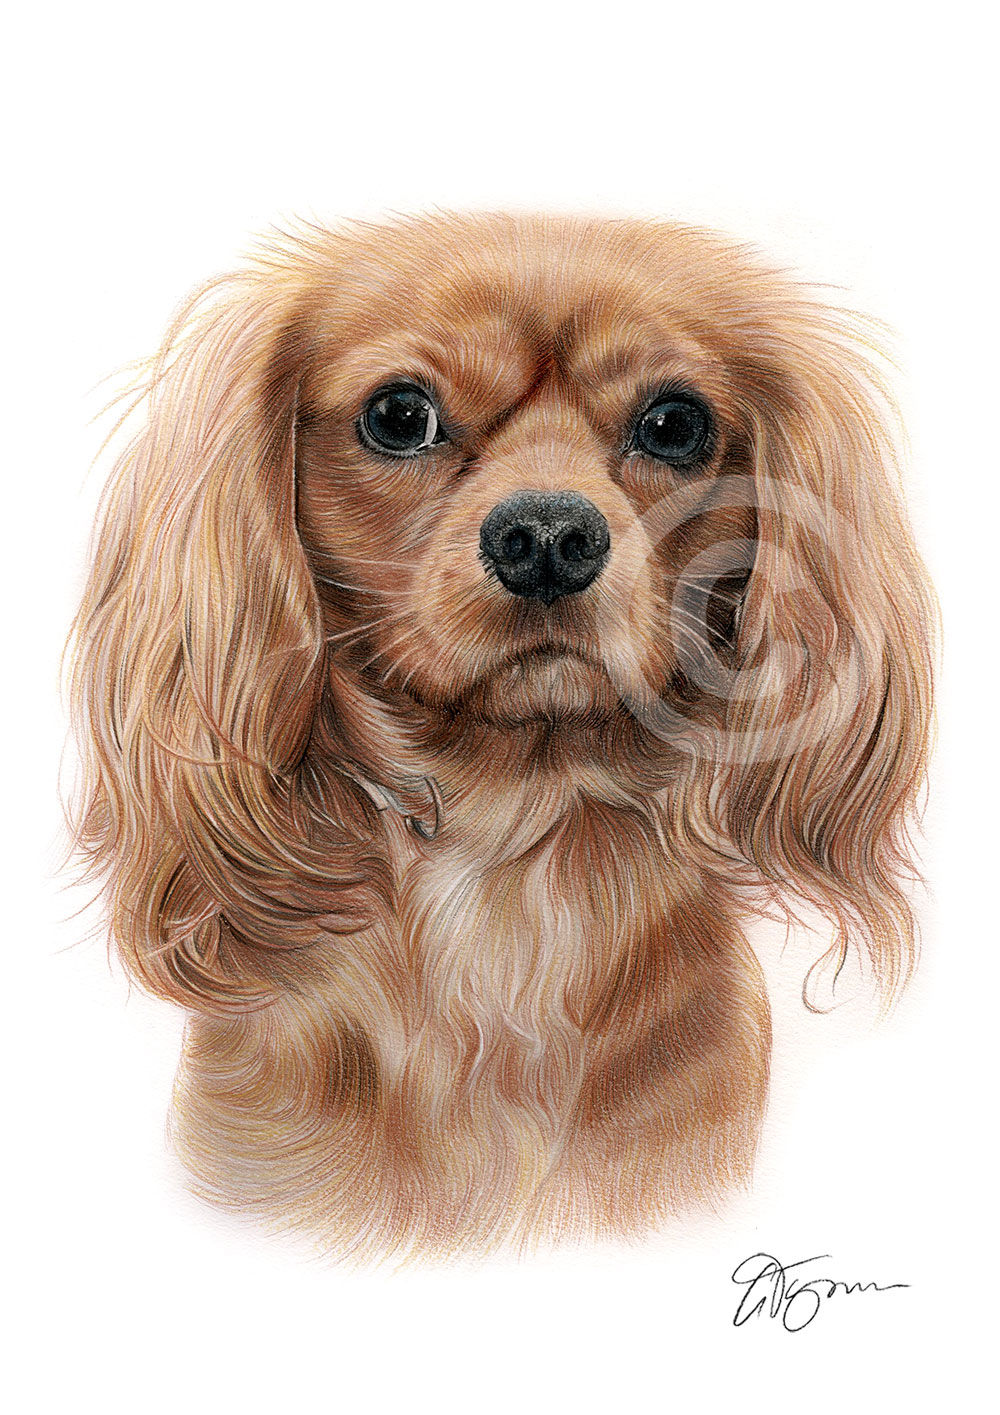 Colour pencil drawing of a King Charles Spaniel by artist Gary Tymon